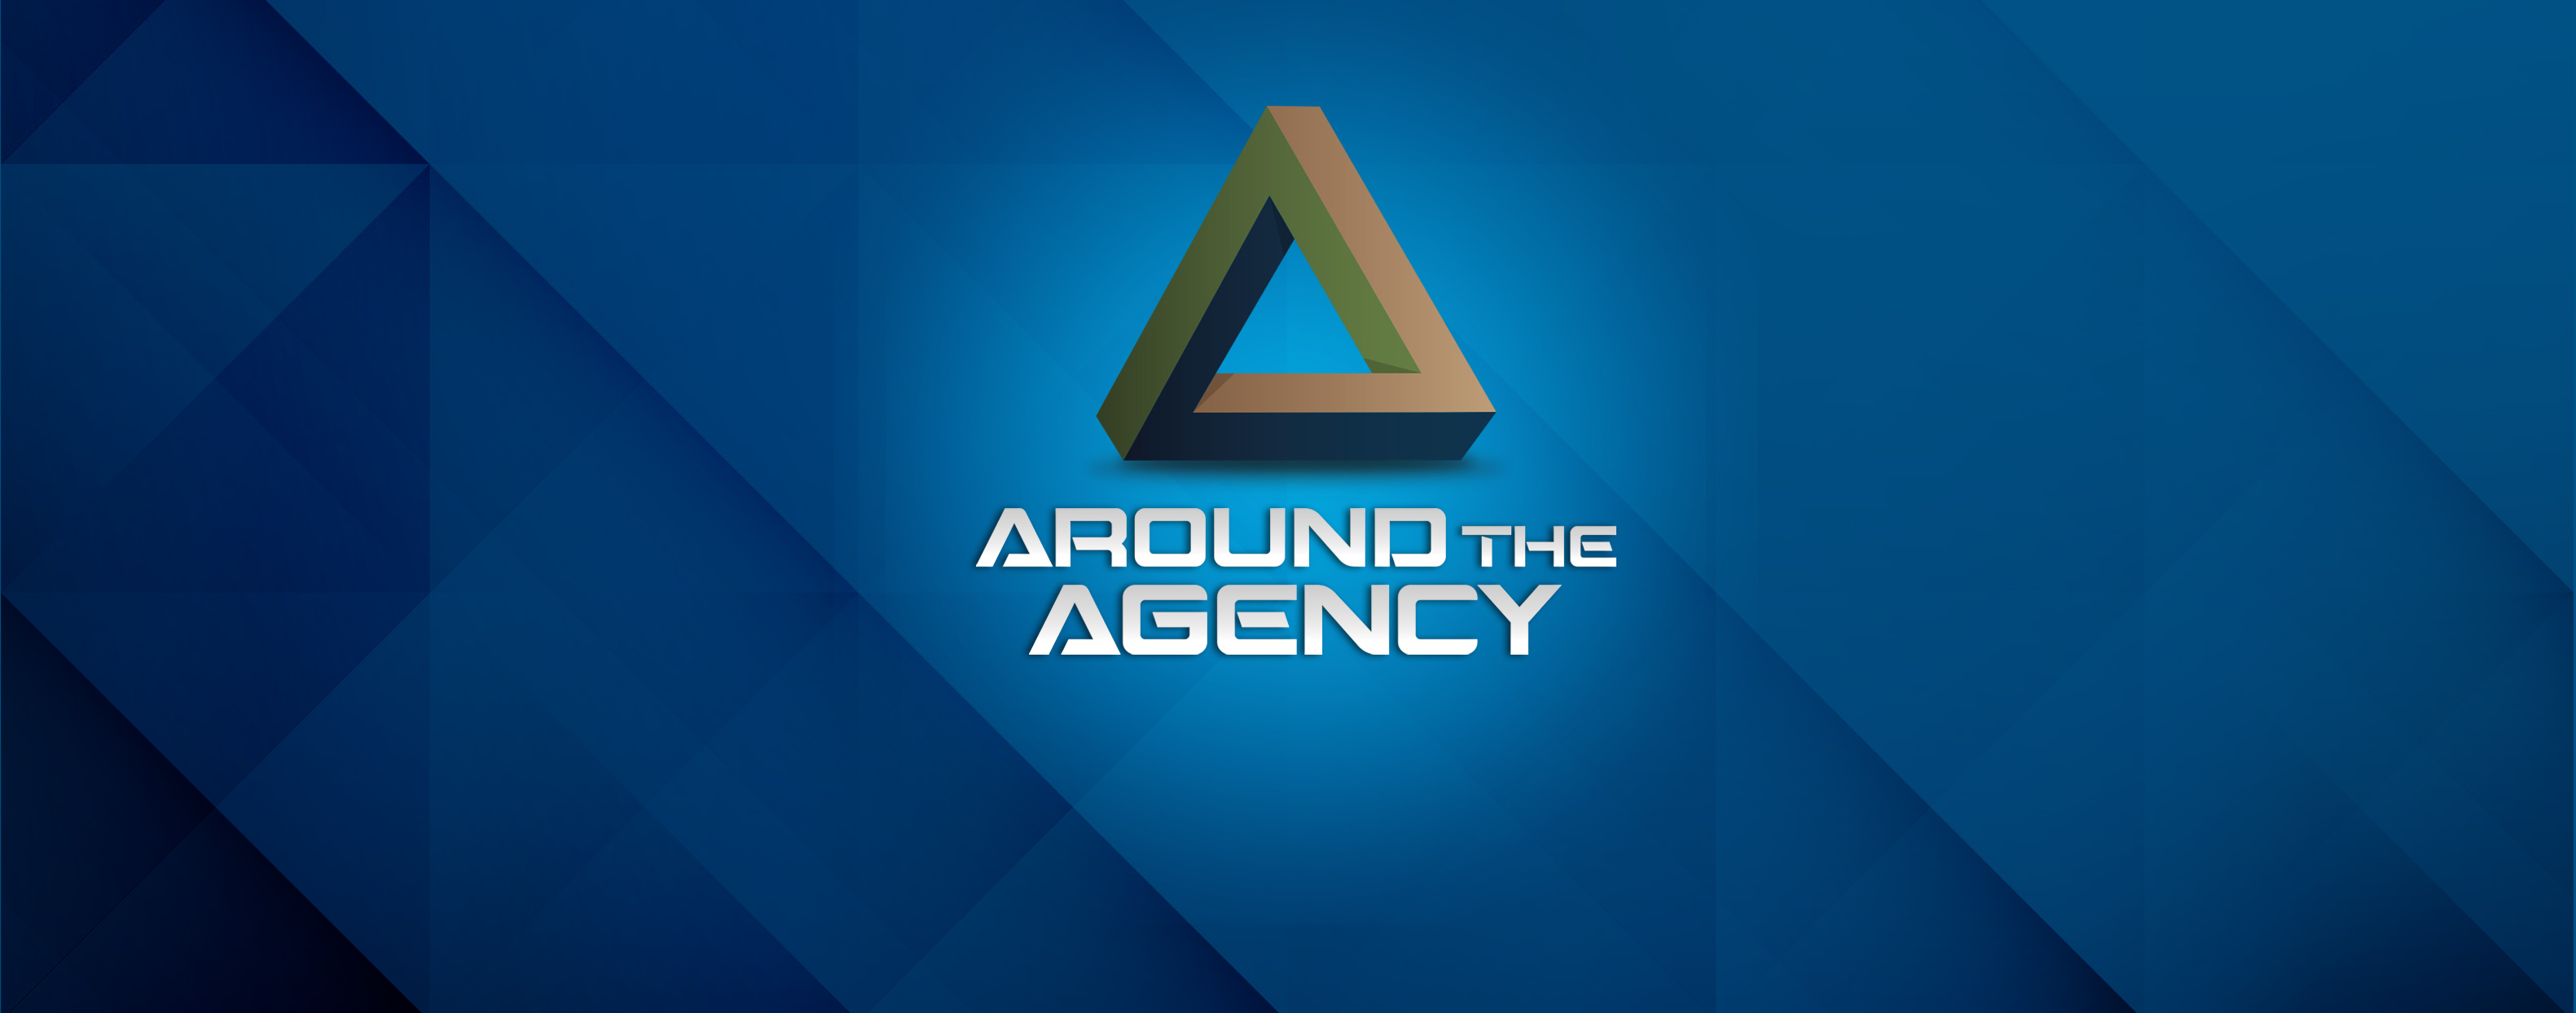 Around the Agency